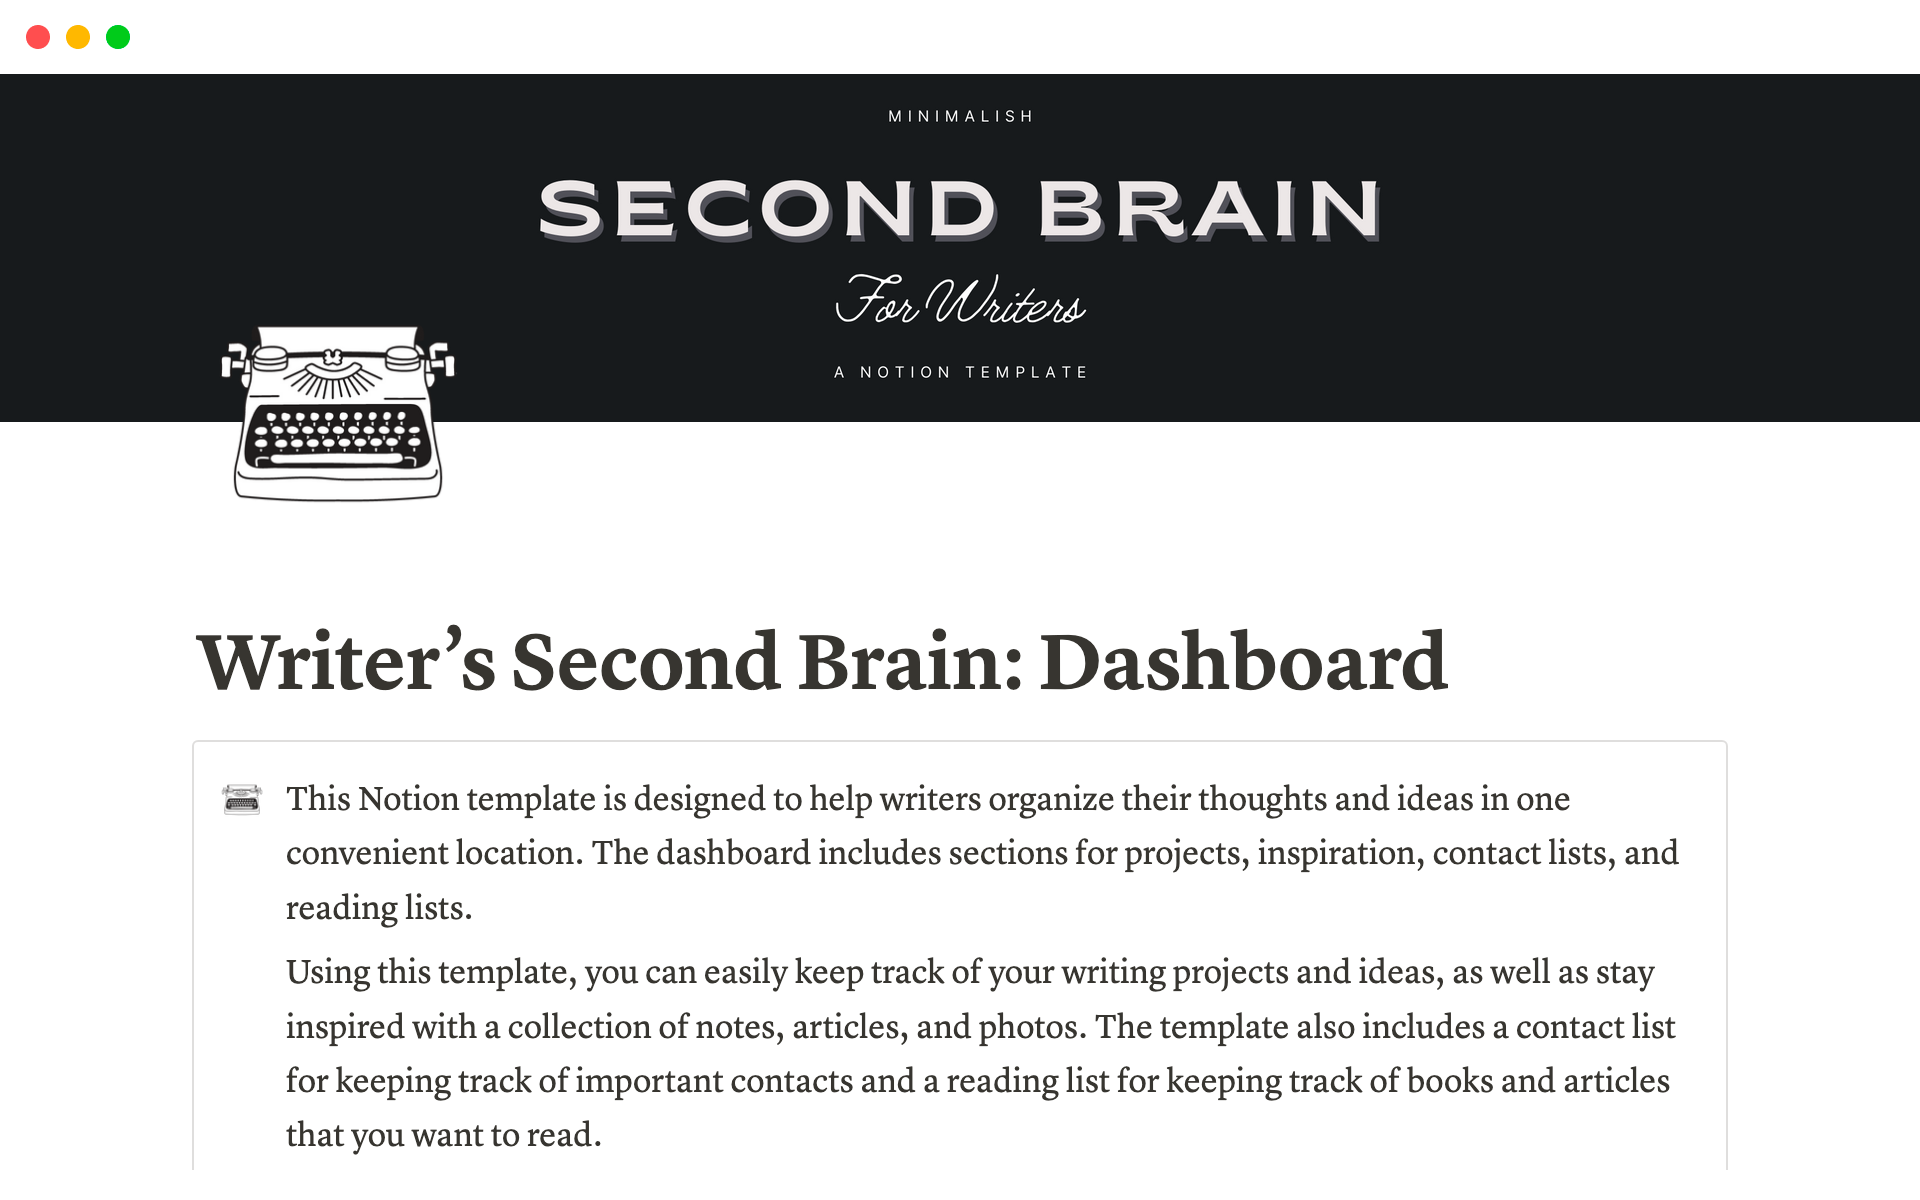 Second brain for writers to plan their writing projects and gather inspiration in one spot.